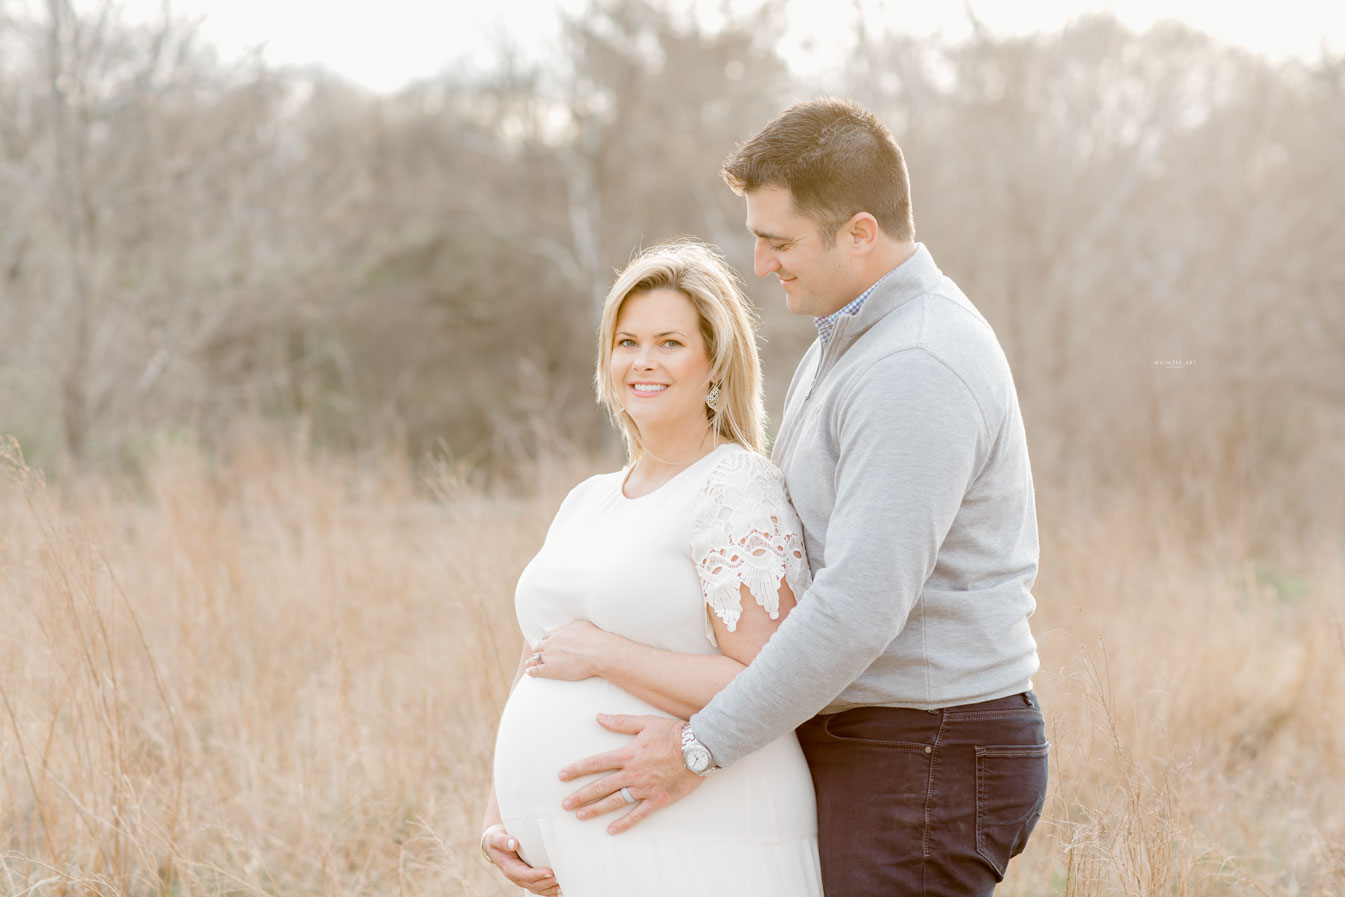 Miller Glimpse | Roanoke Maternity Session | Whimsee Art Photography